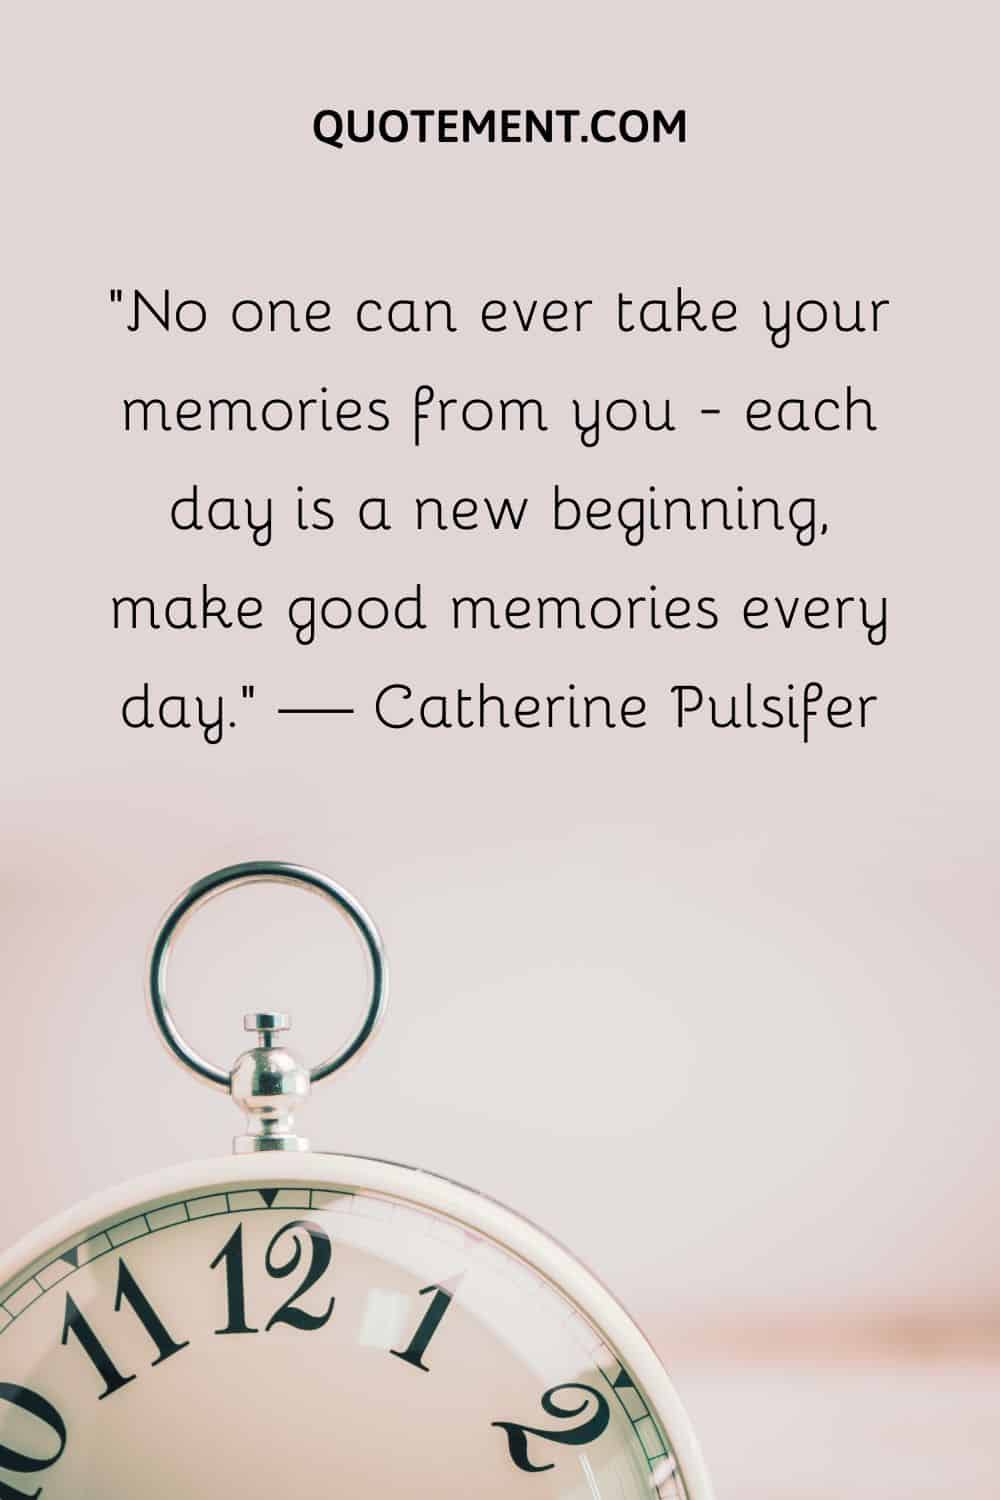 No one can ever take your memories from you